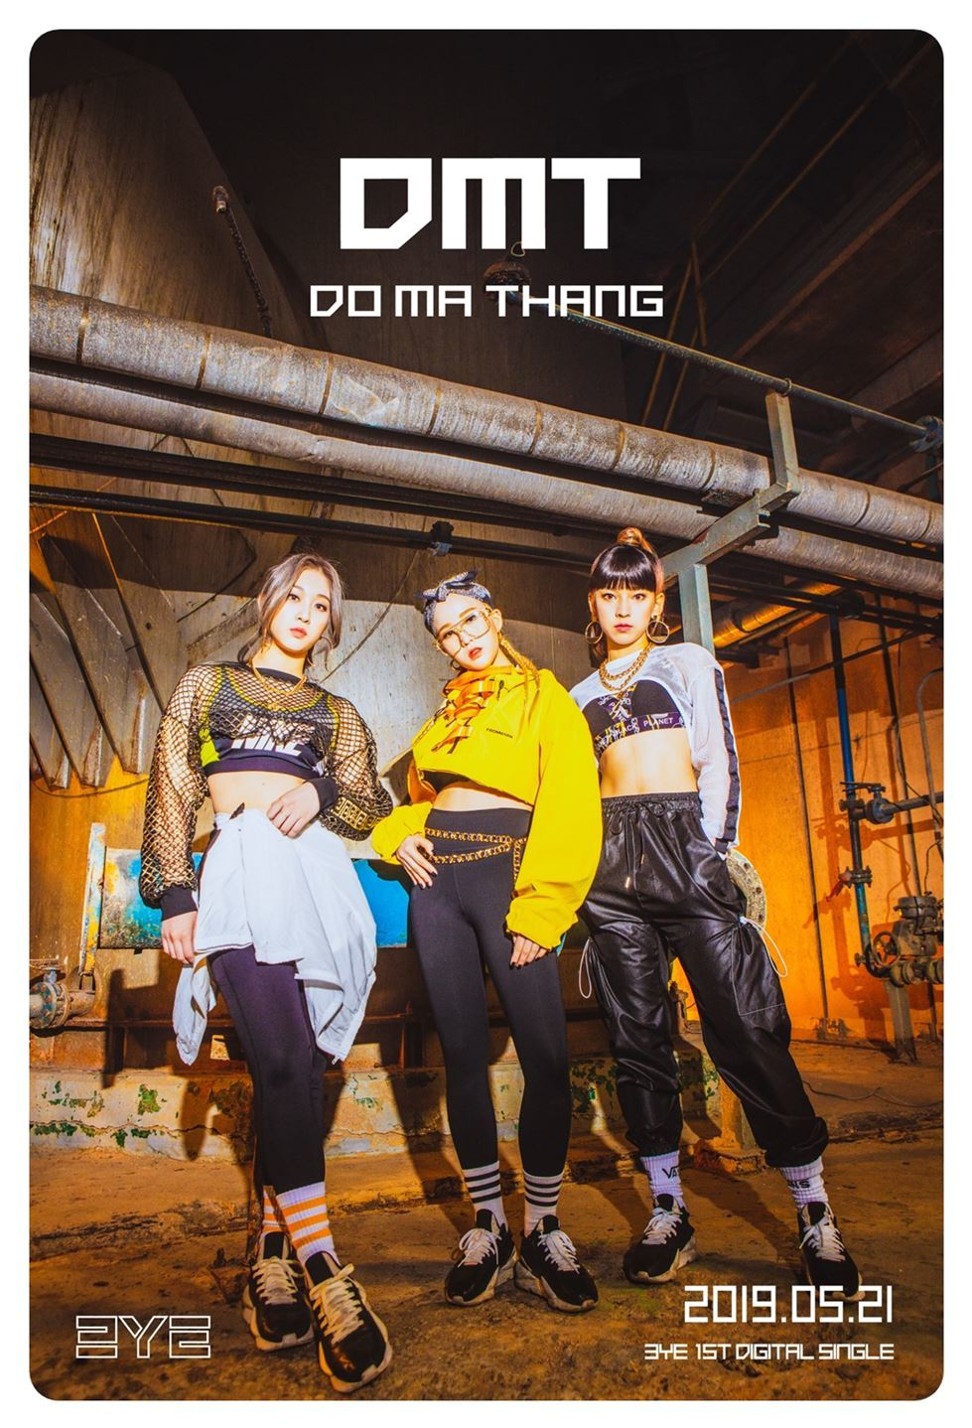 3YE – made up of Ha-eun, Yuji and Yurim – pictured in the official poster for its May 21 debut release, “Do Ma Thang’. Photo: Fortune Entertainment